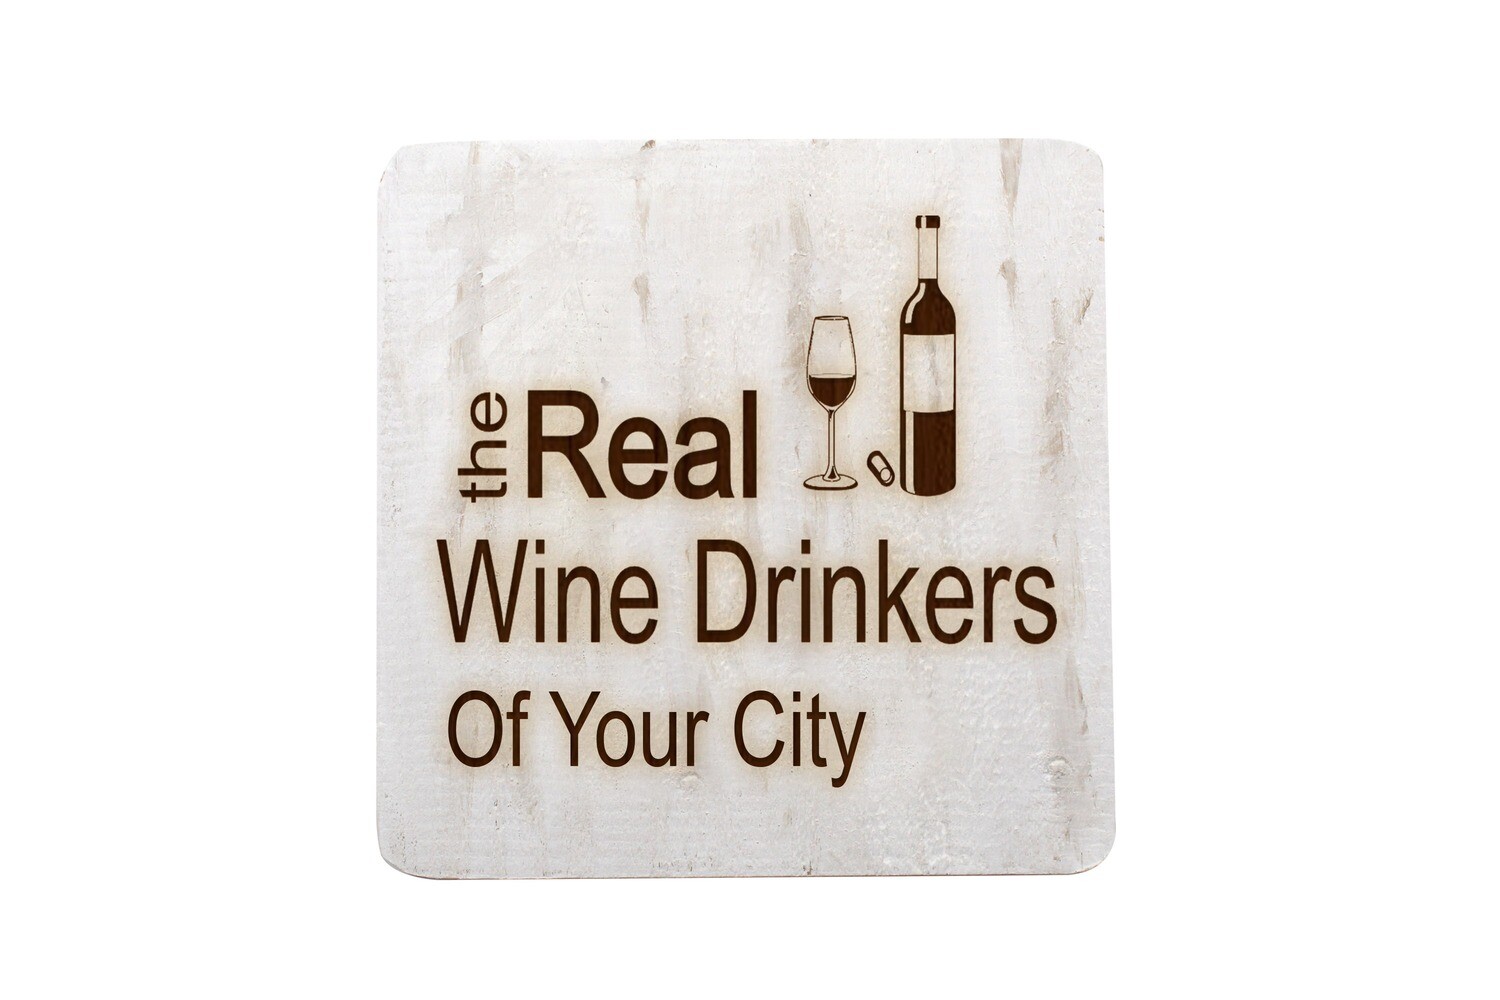 The Real Wine Drinkers (Choose Image and Add Location) of Hand-Painted Wood Coaster Set